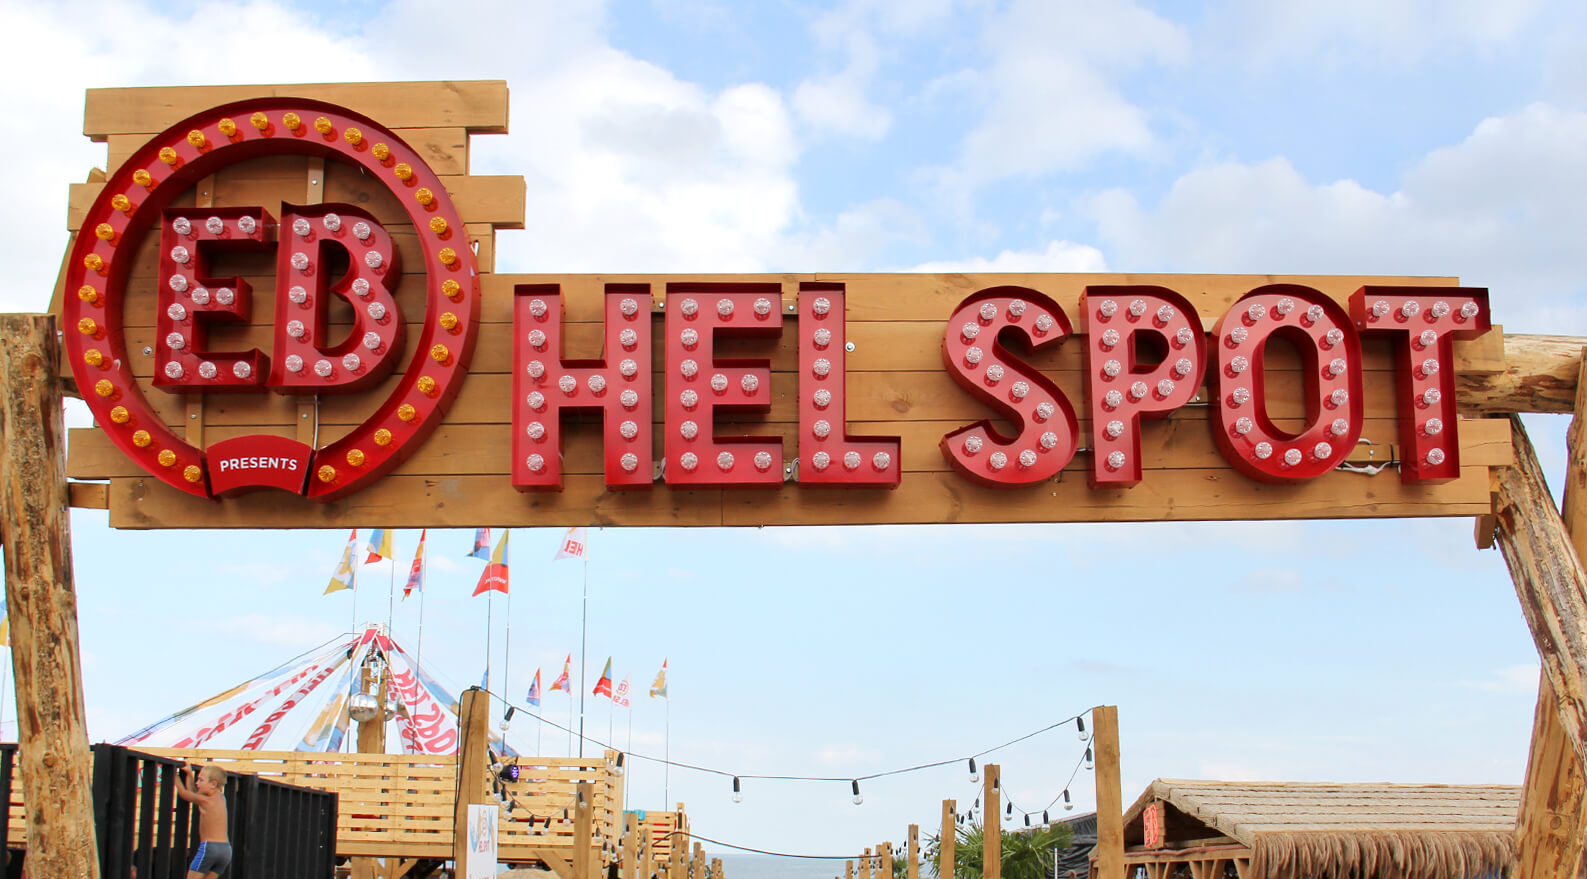 EB hell spot - EB Hel Spot Festival - logo and letters with bulbs placed on a wooden frame above the entrance